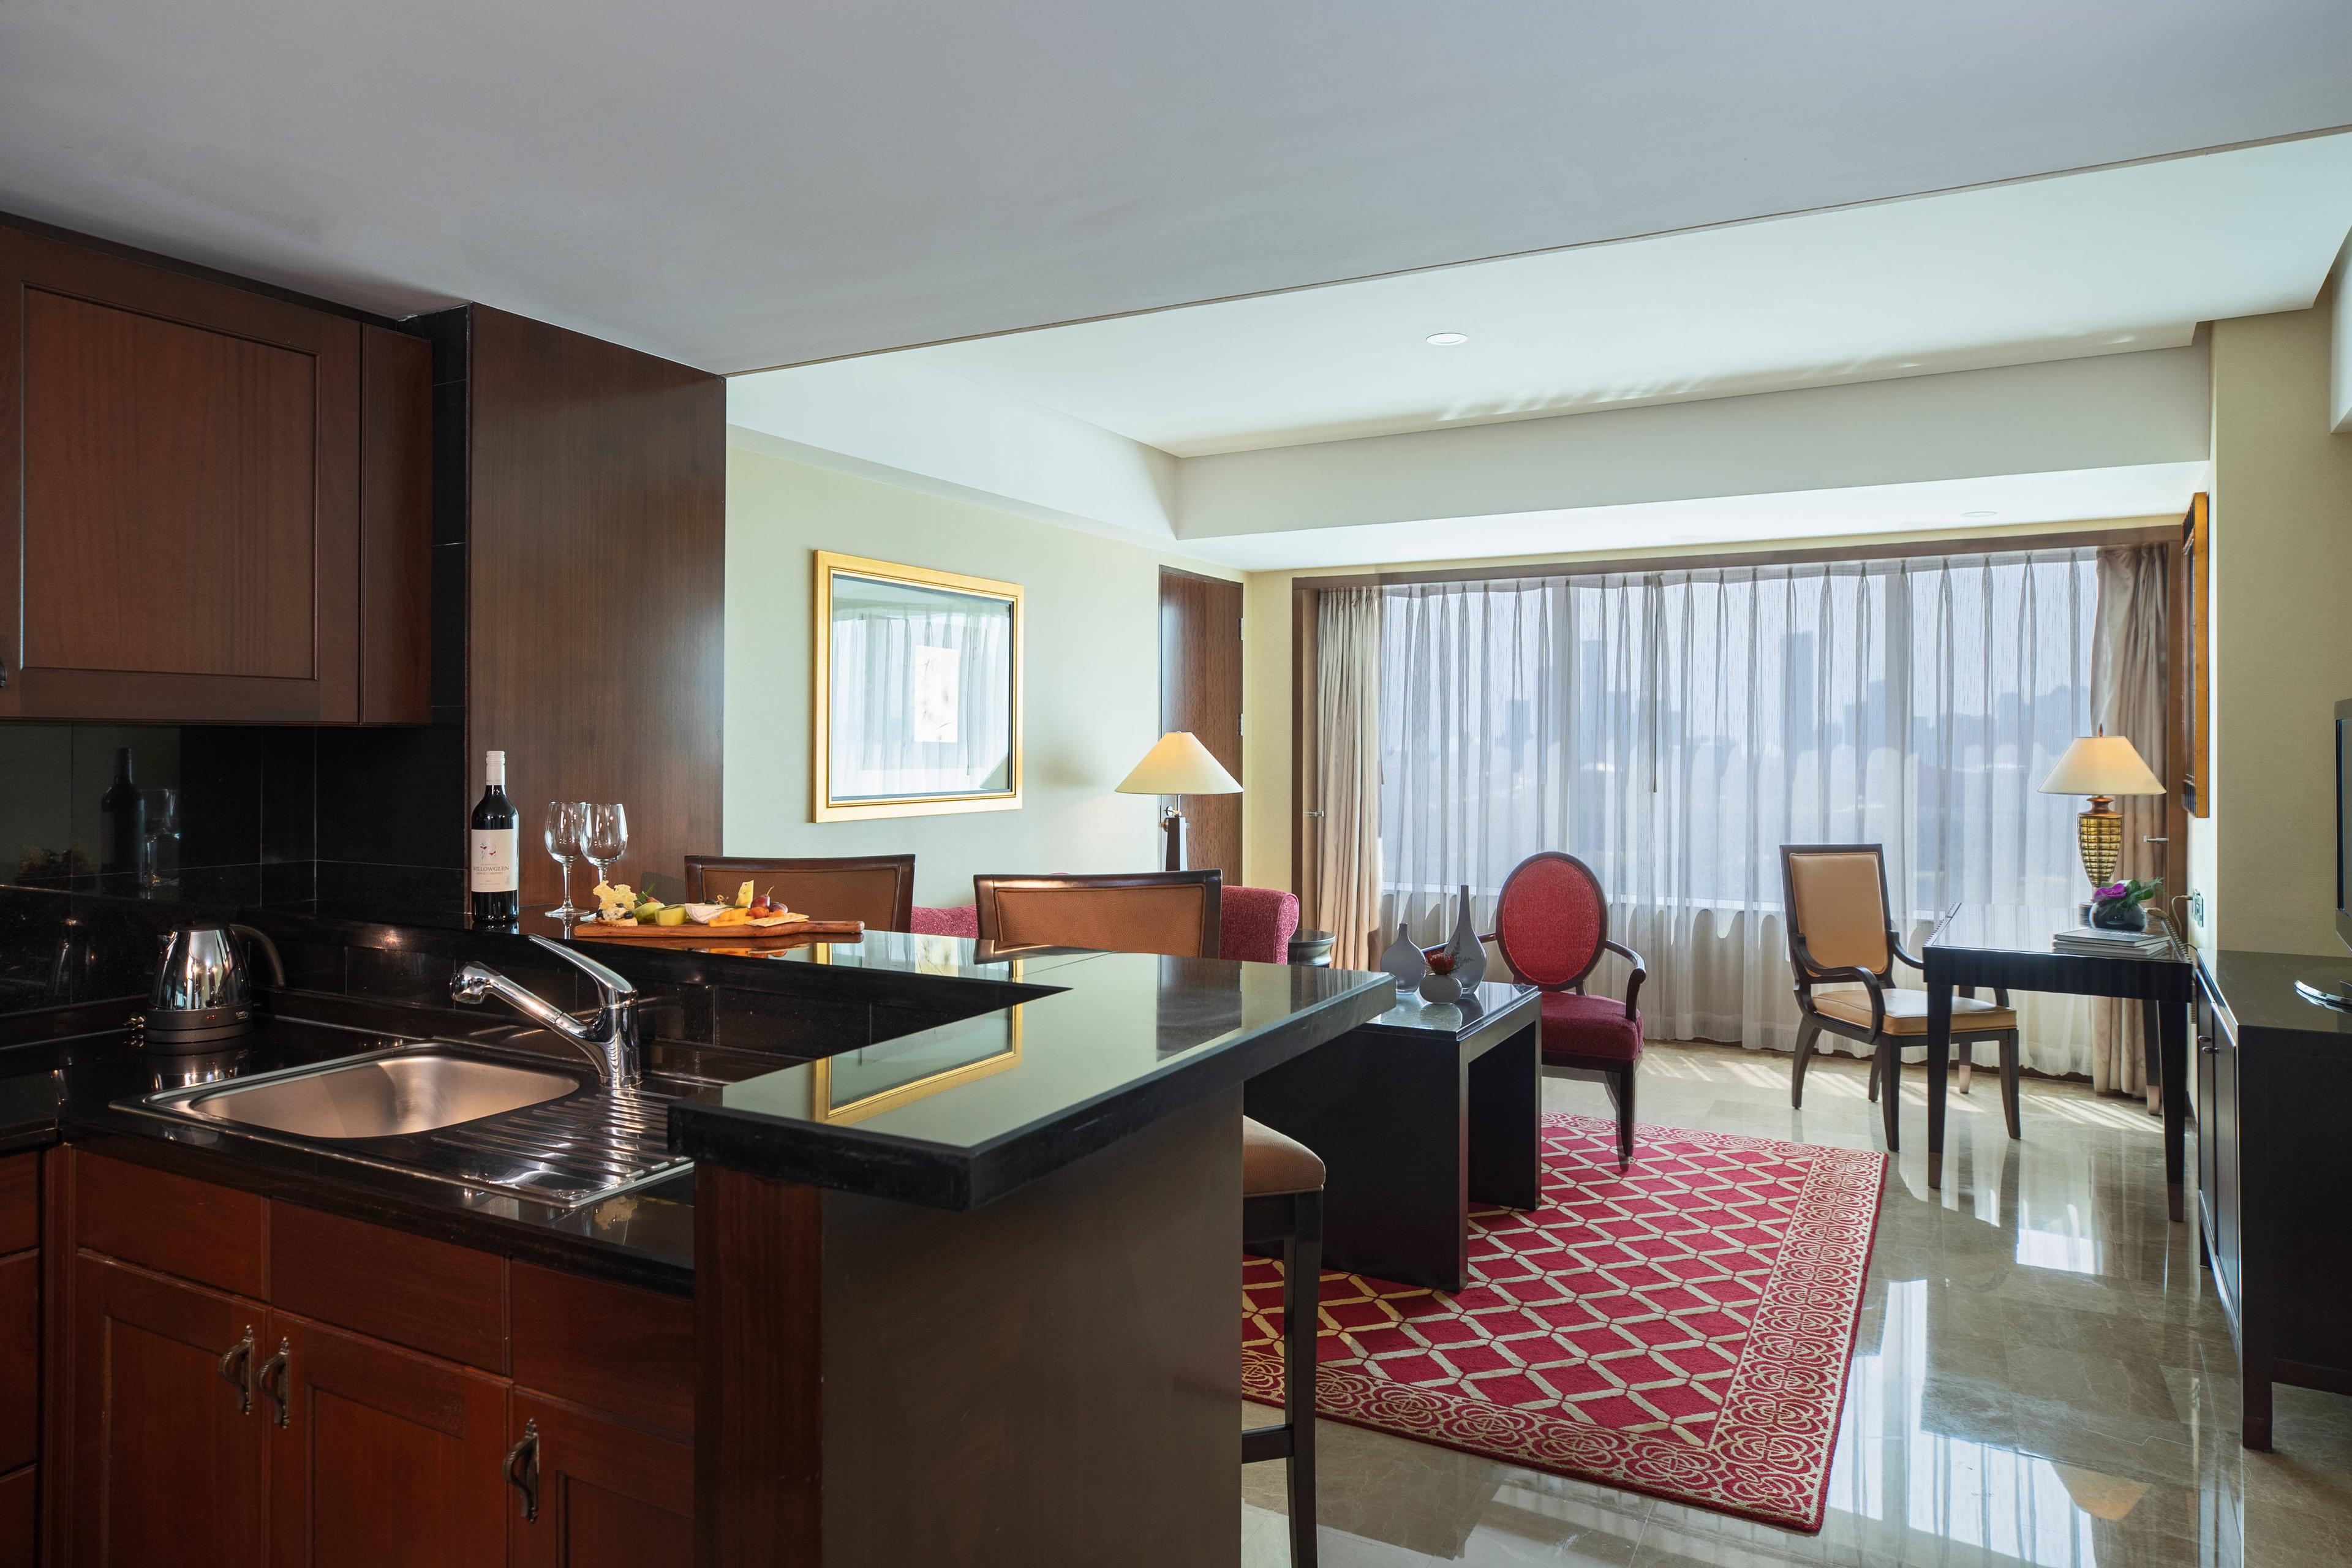 The Executive Suite is well-equipped with user-friendly working area, a considerate kitchen area, comfortable bedroom and access of high-speed Internet.